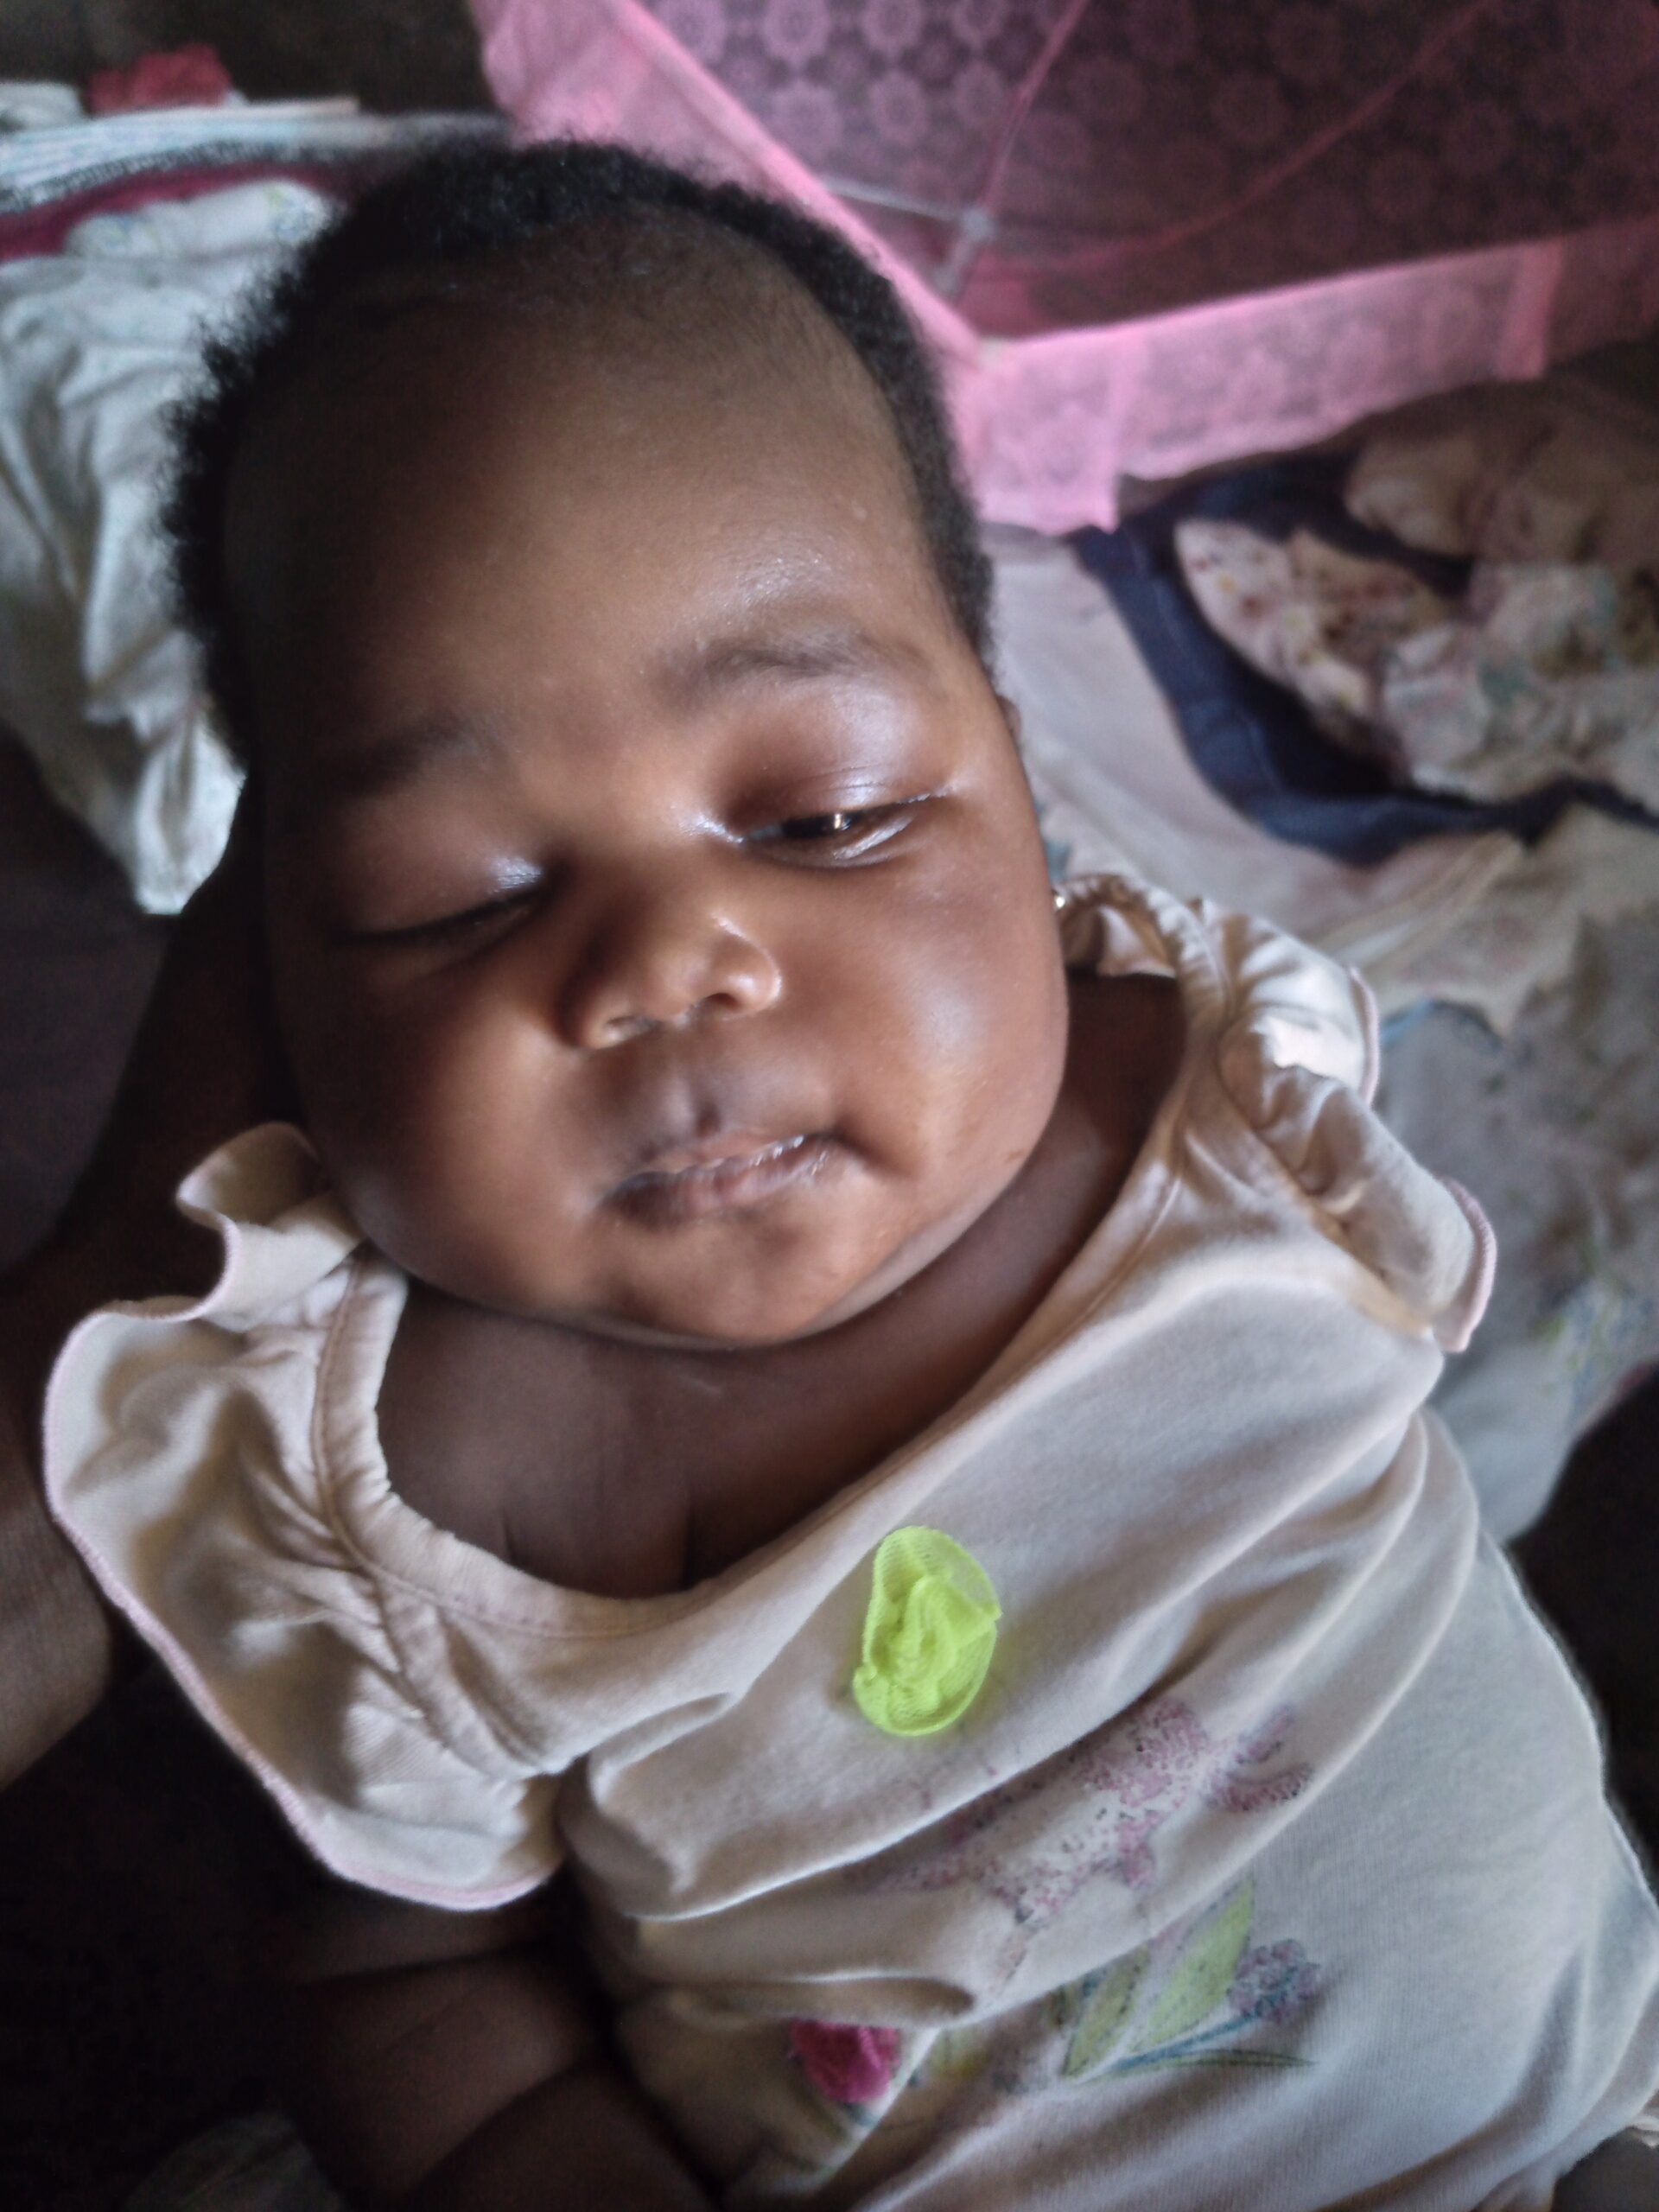 Family appeals for help to trace child stolen from saloon in Juba